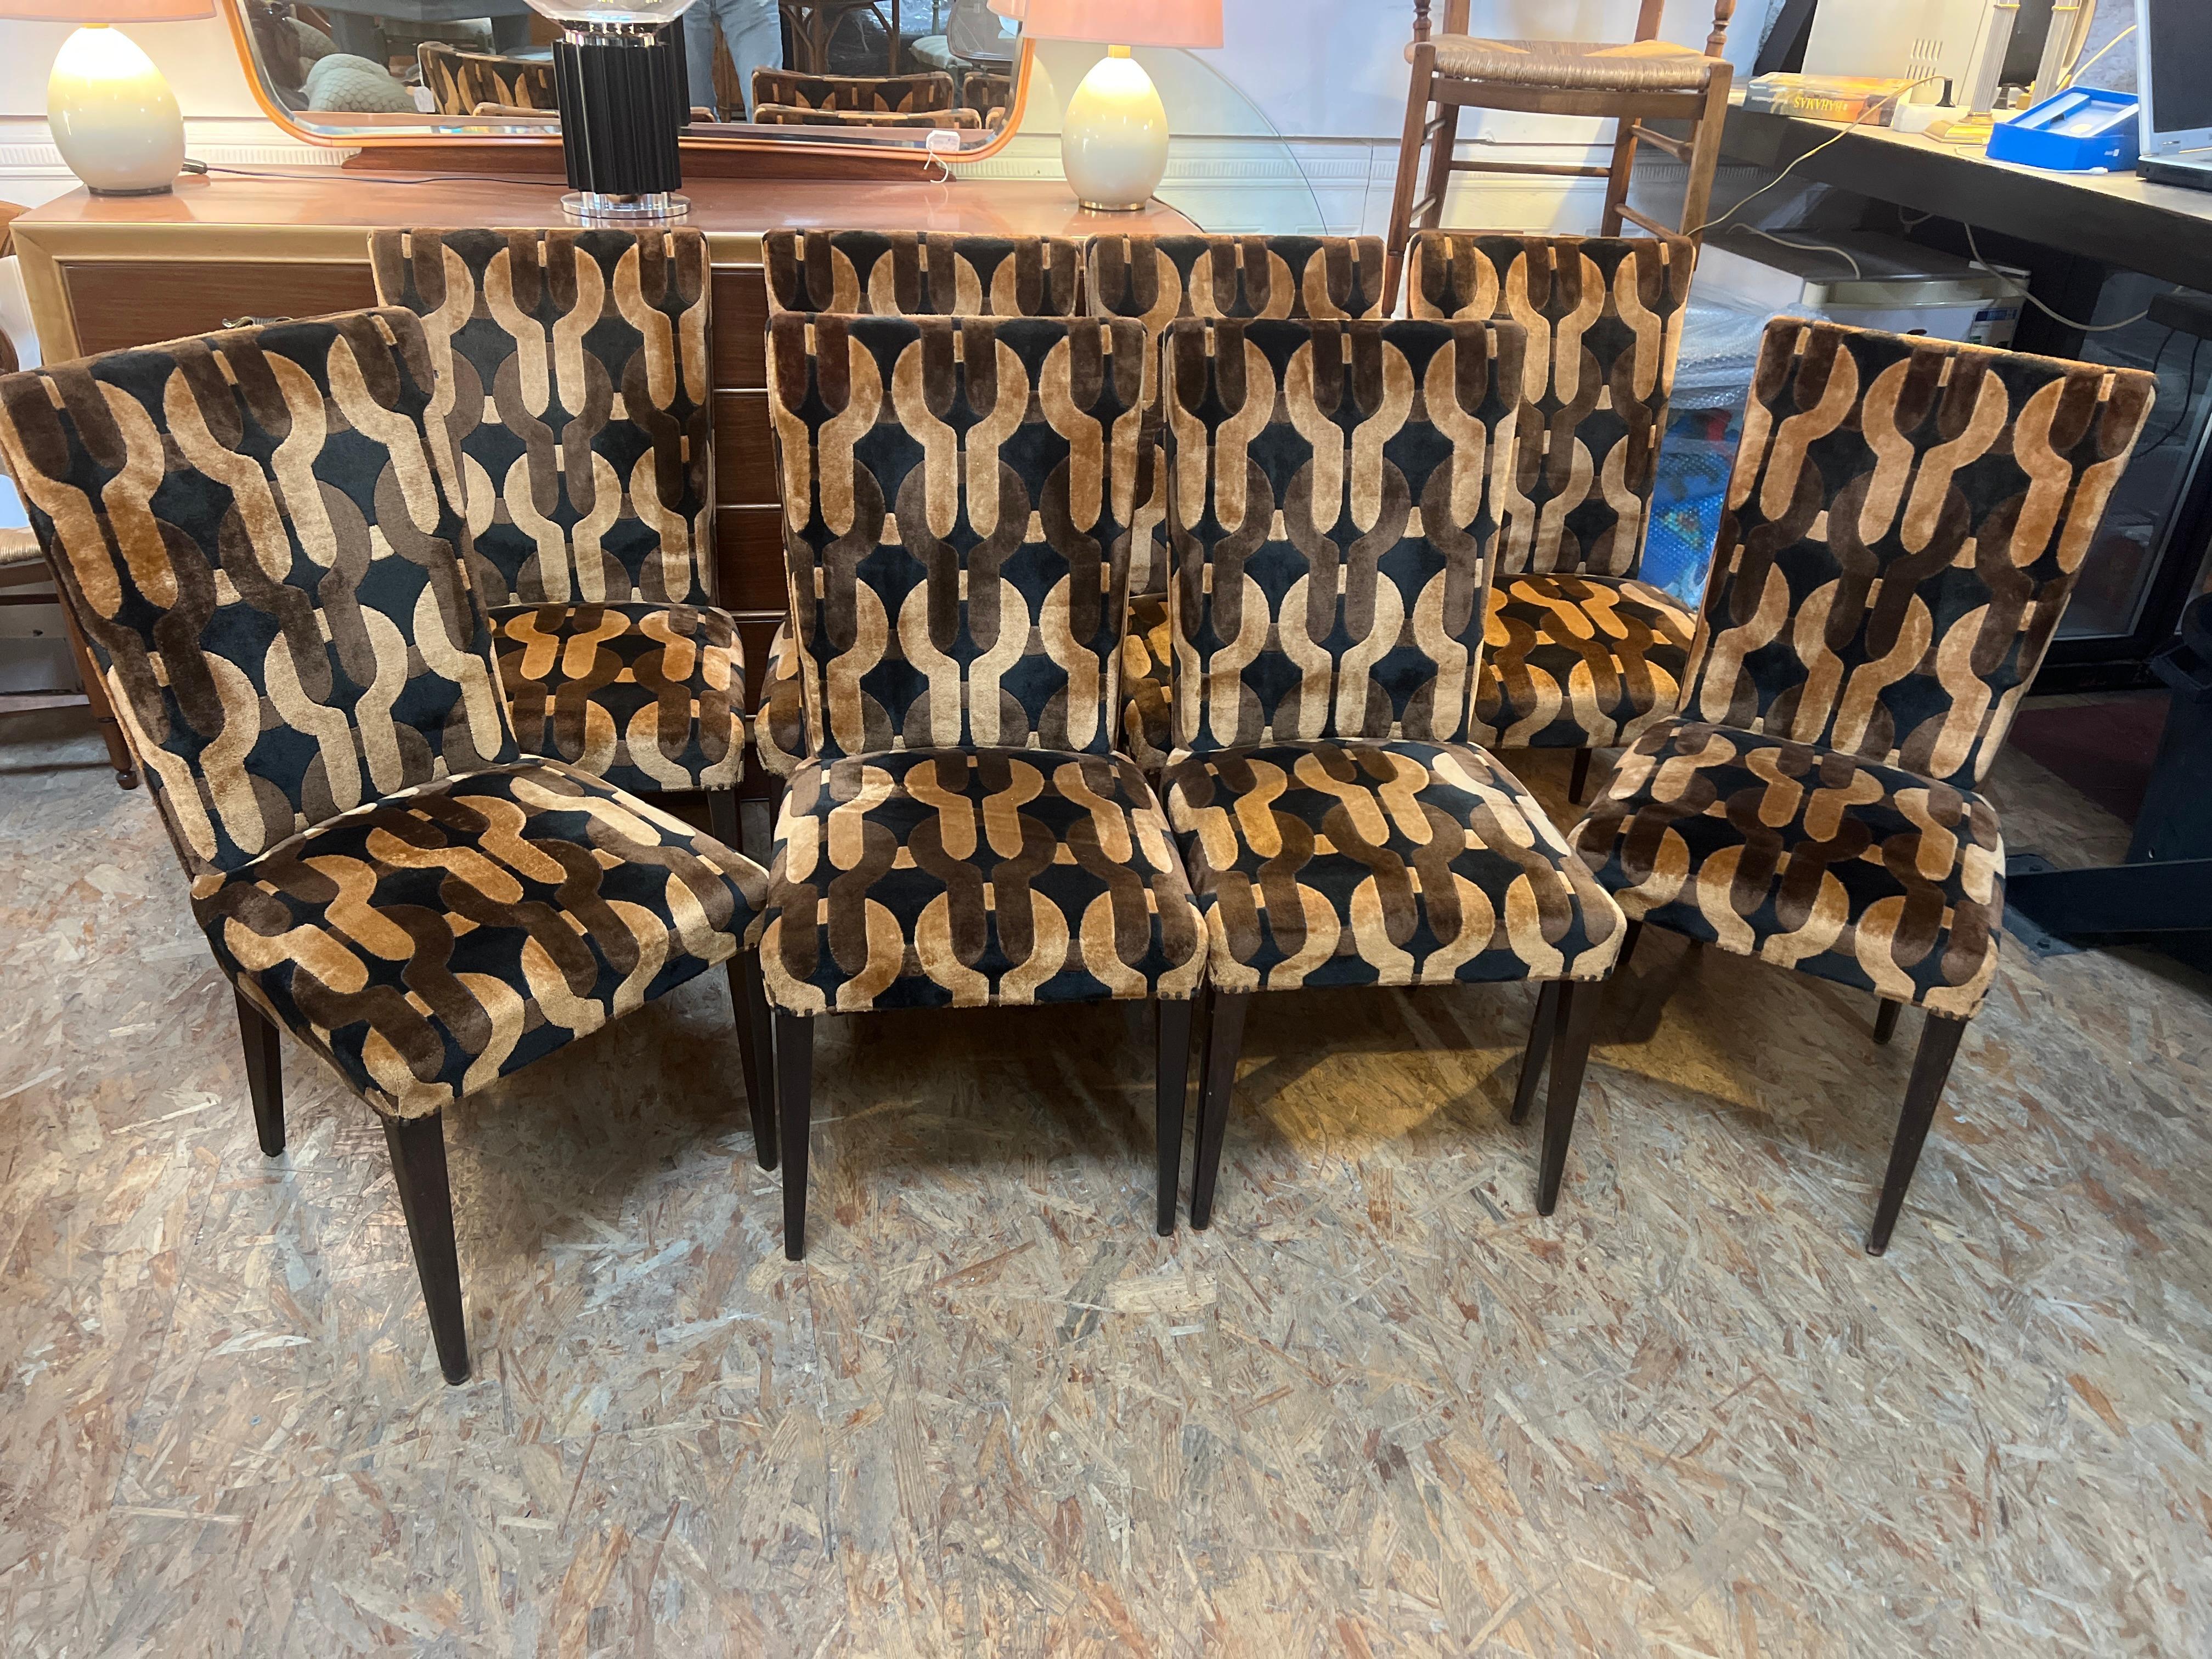 magnificent series of 8 chairs by Pierre Cardin, 1970 edition
the typical fabrics of the Cardin collection will take you back to the psychadelic period of the 70s
the seats, their comfort are in very good original condition

Pietro Costante Cardin